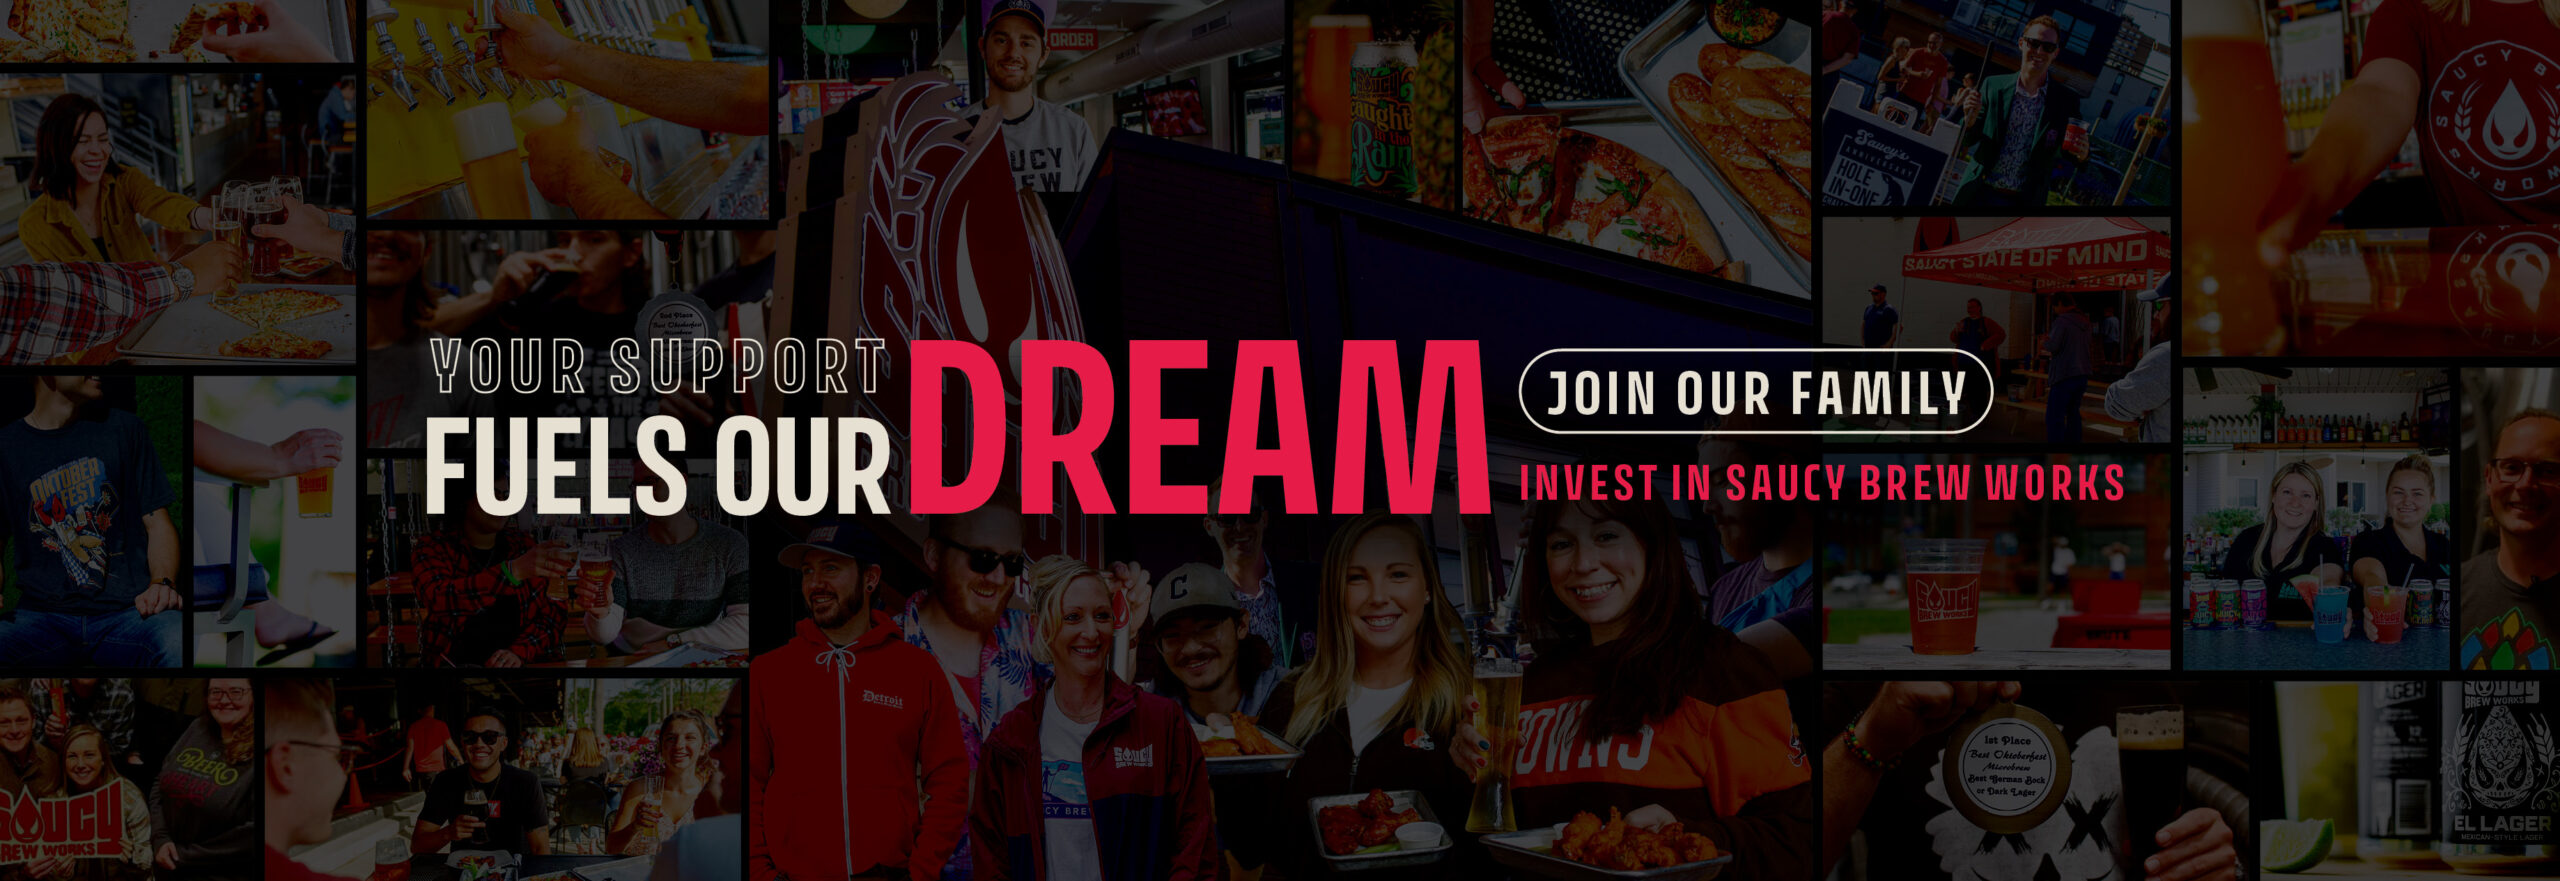 Fuel Our Dreams. Join Our Family. Invest in Saucy.